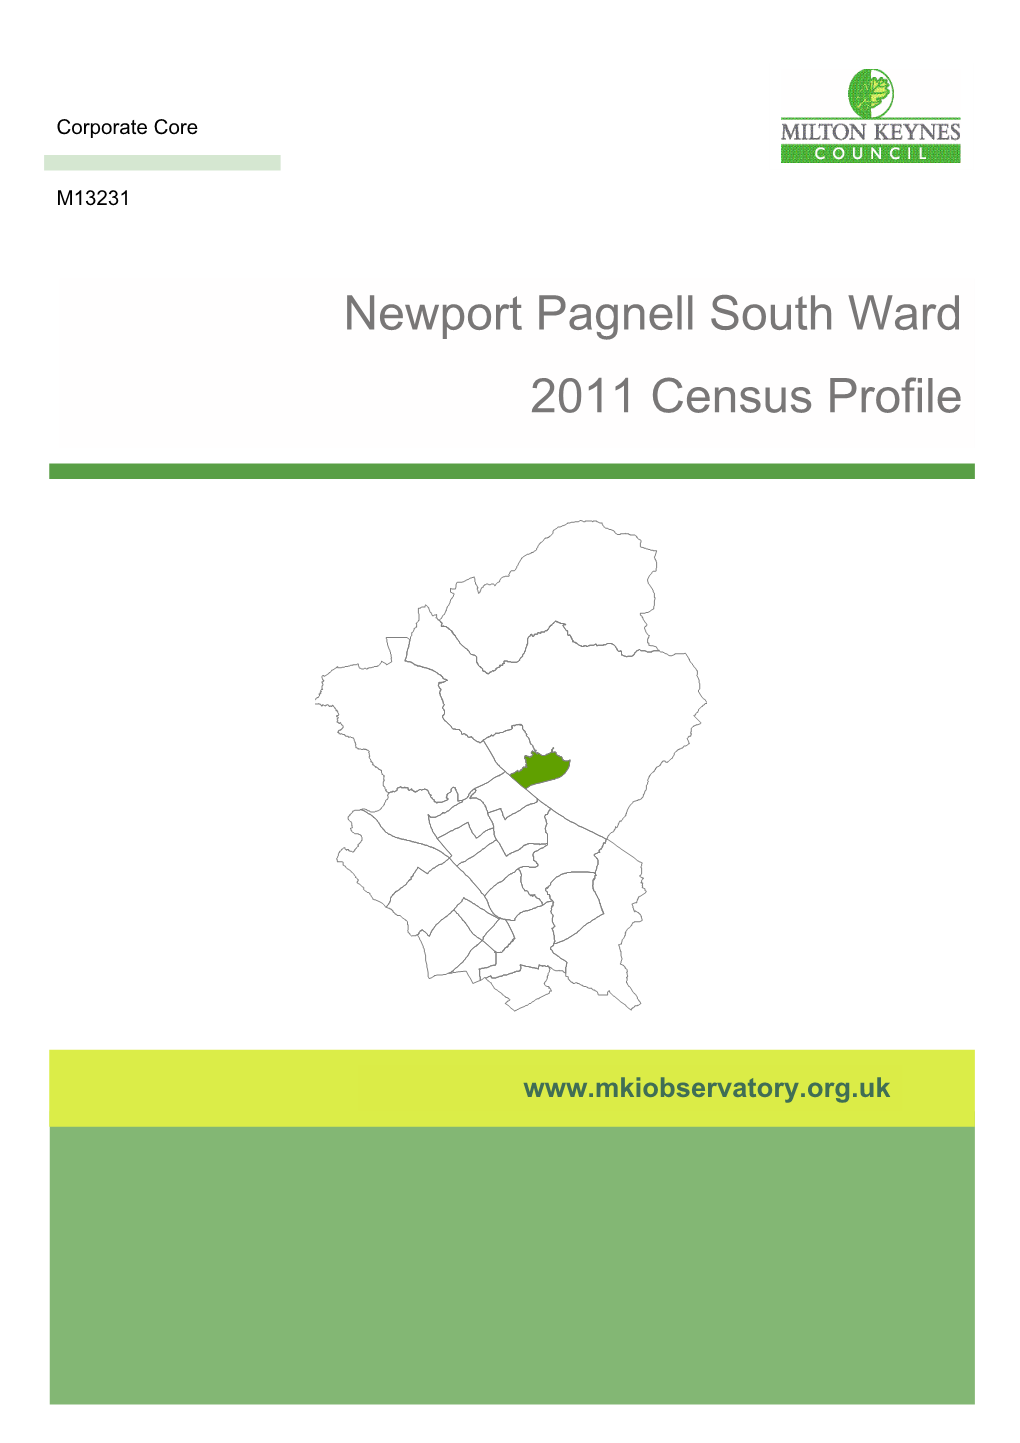 Newport Pagnell South Ward 2011 Census Profile